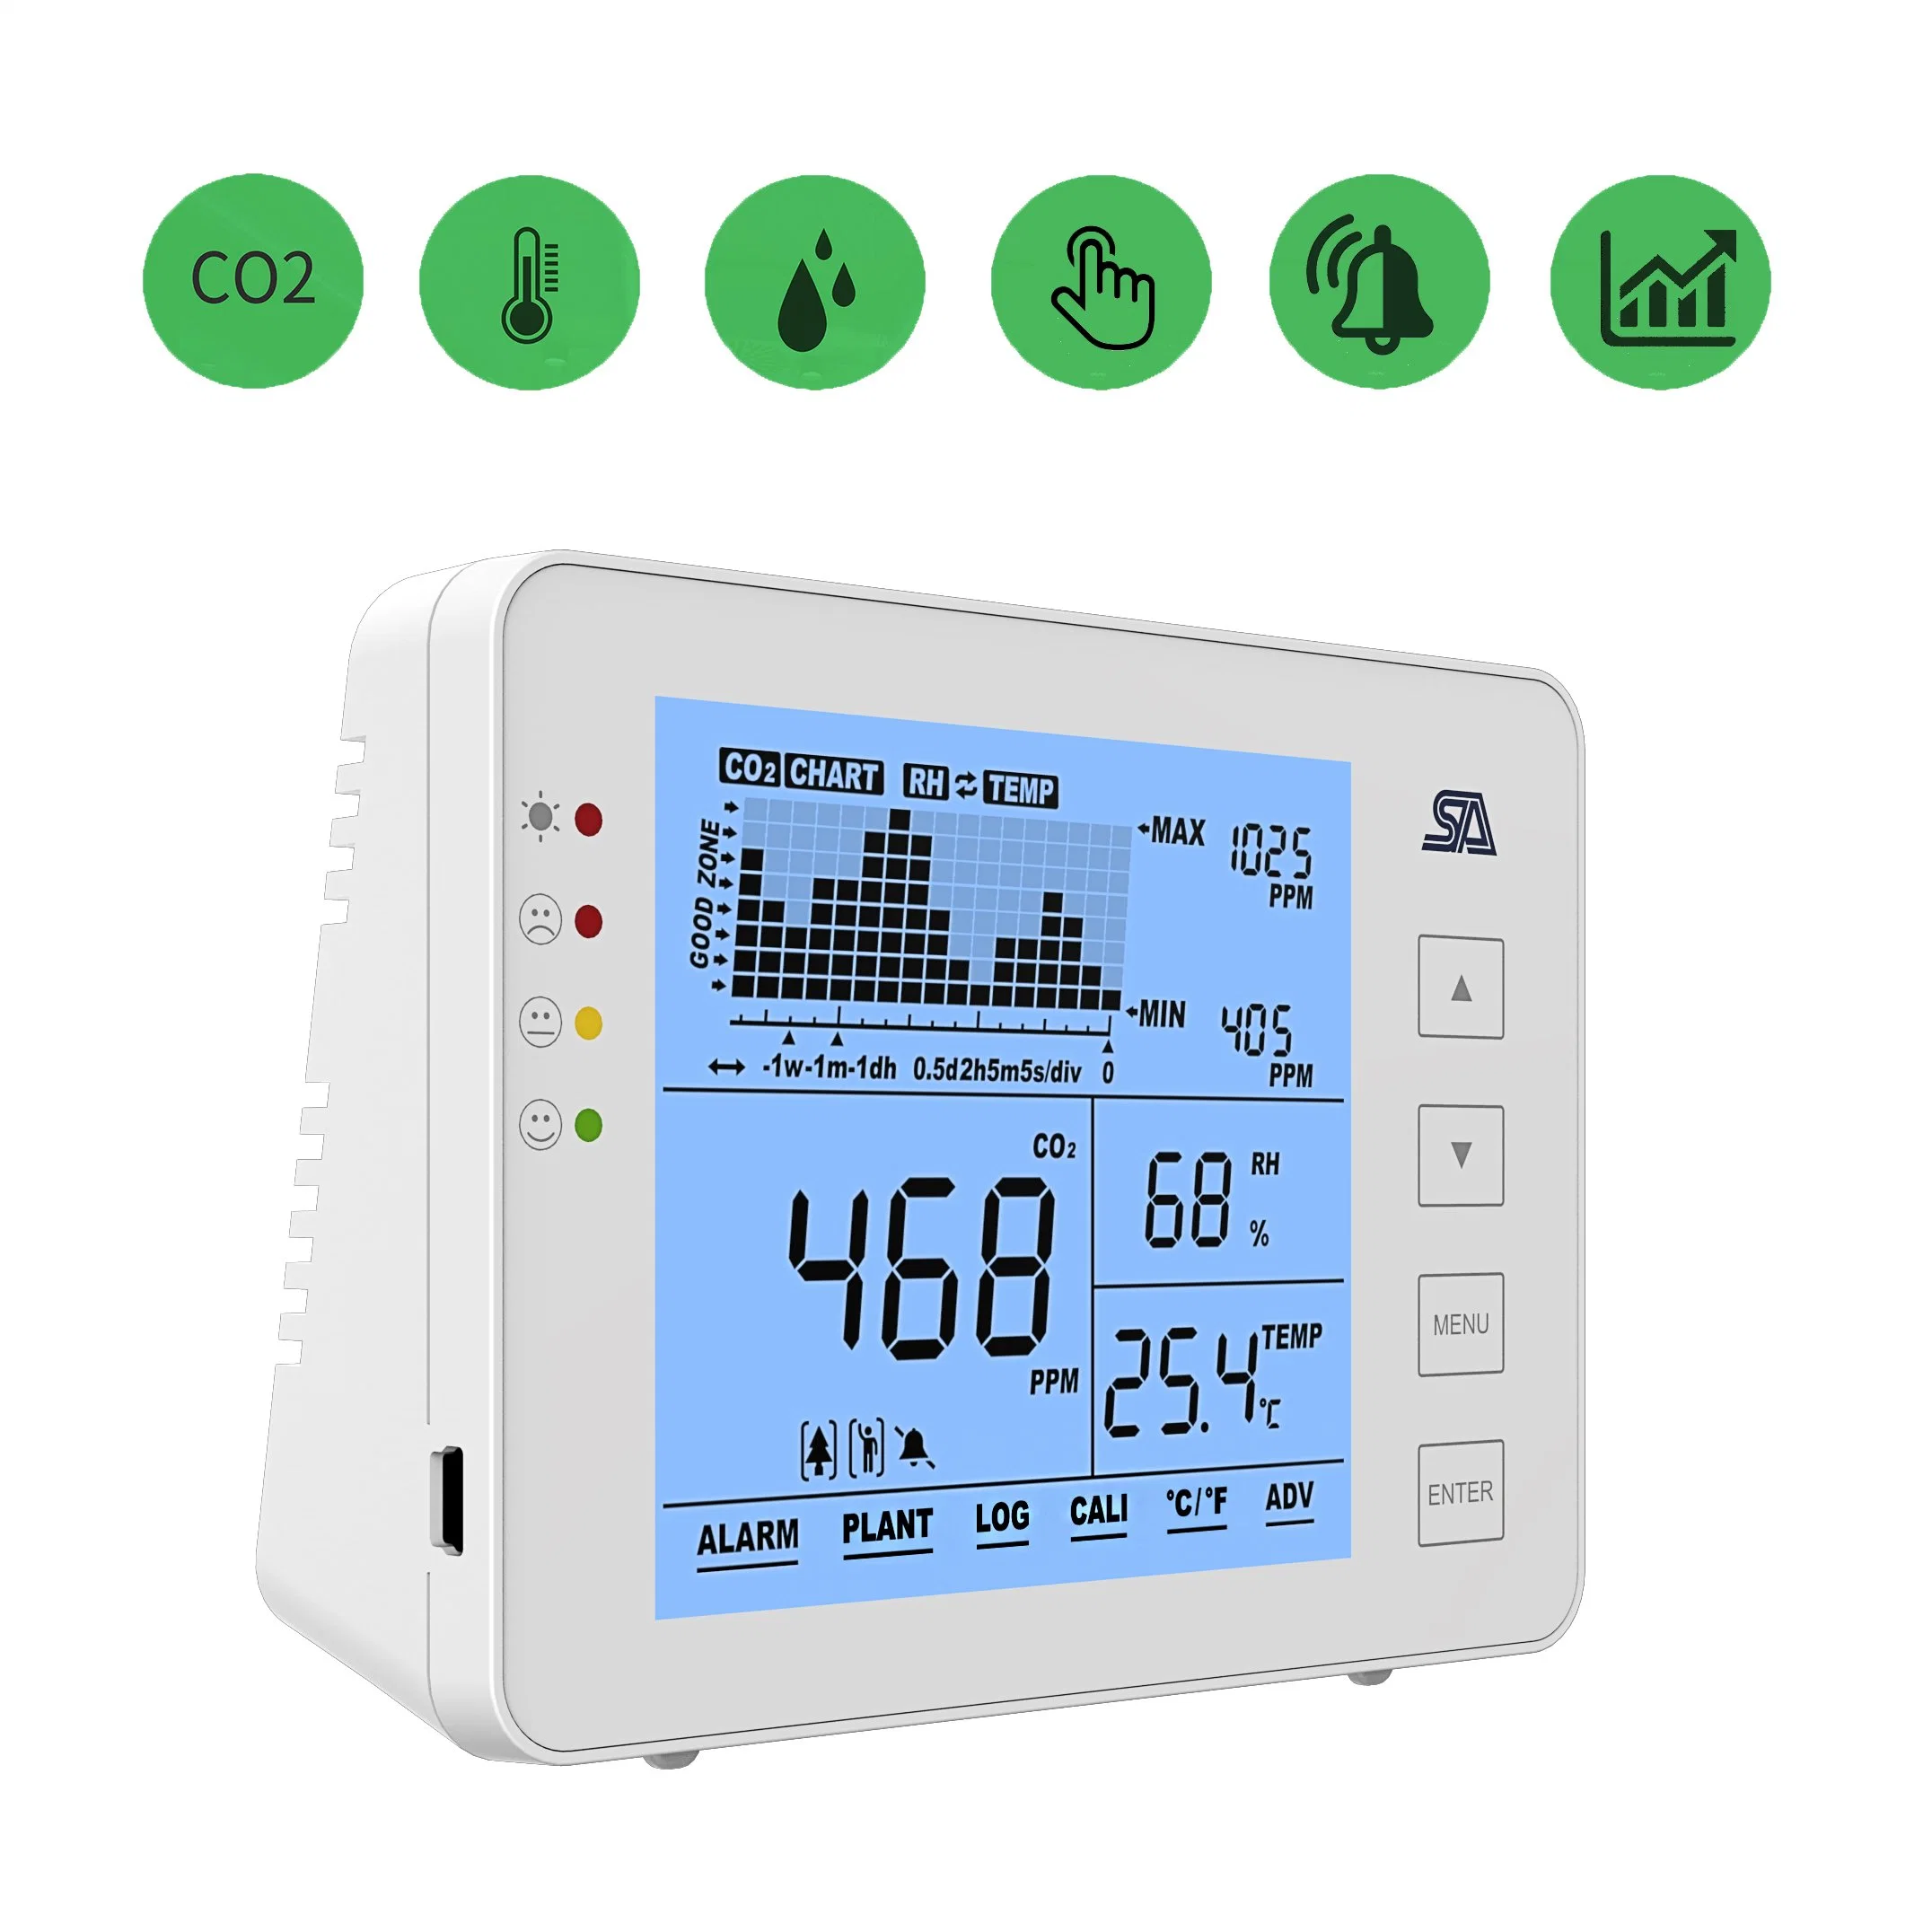 Indoor CO2 Monitor Iaq Meter Carbon Dioxide Temperature Humidity Alarm with Mute Available Desktop CO2 Meter